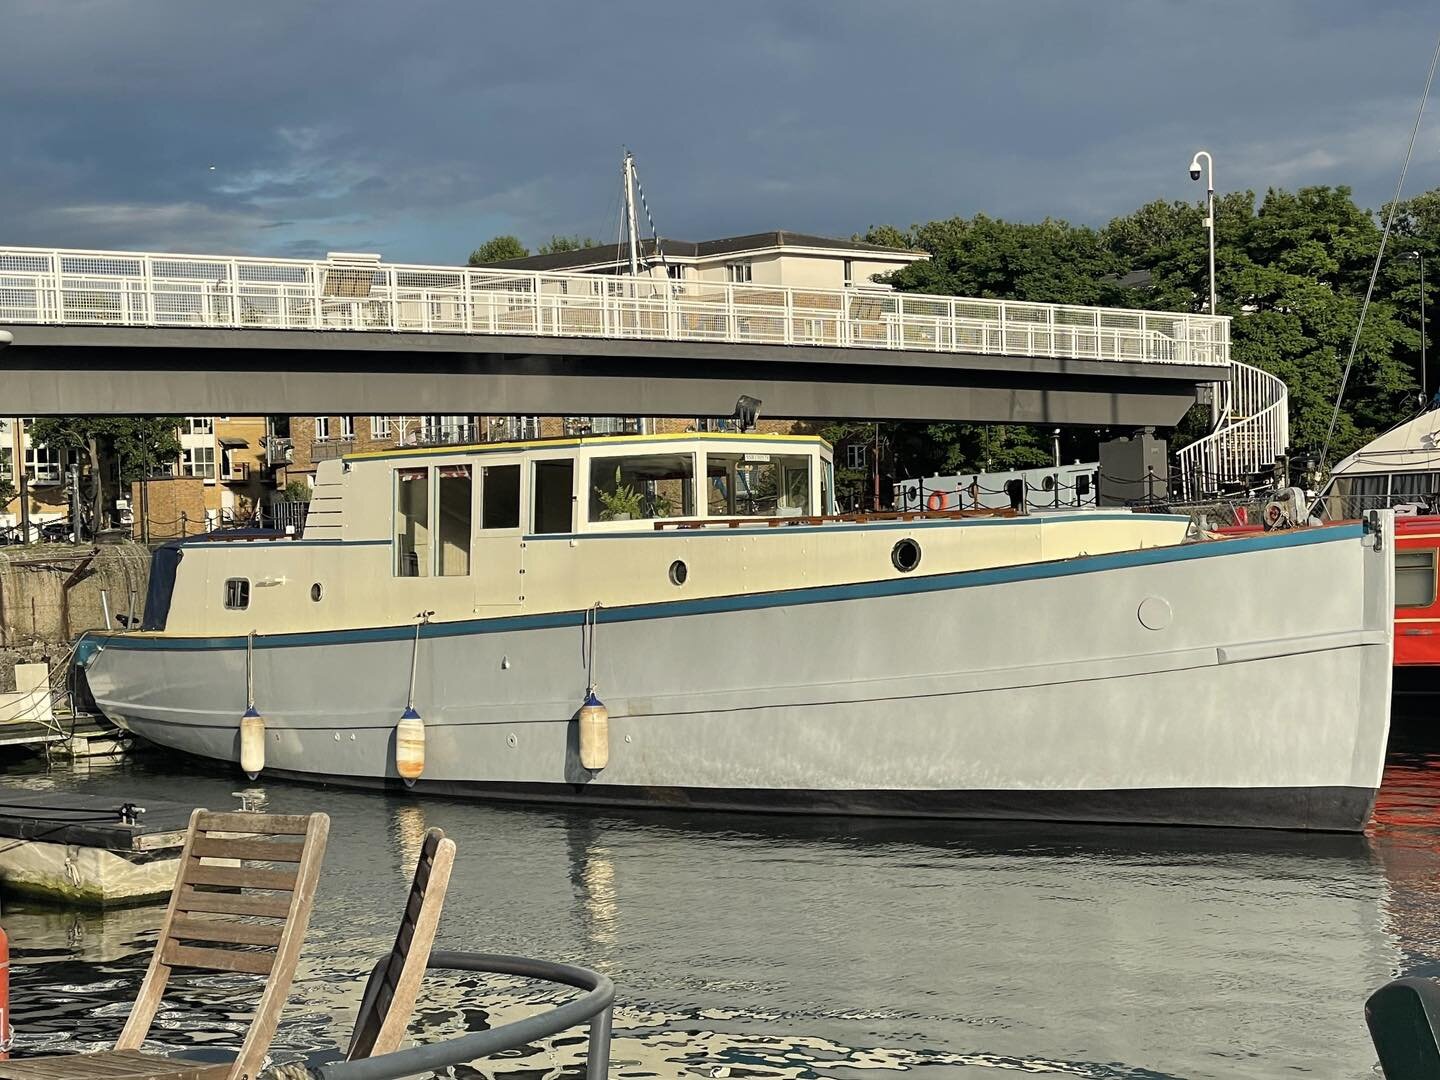 For Sake: This converted Admiralty Launch has had upgrade and maintenance works completed, including exterior finishes and interior electrics and carpentry.  #greenlanddock #boatsforsale #surreyquays #southdockmarina #londonproperty #canadawater #liv